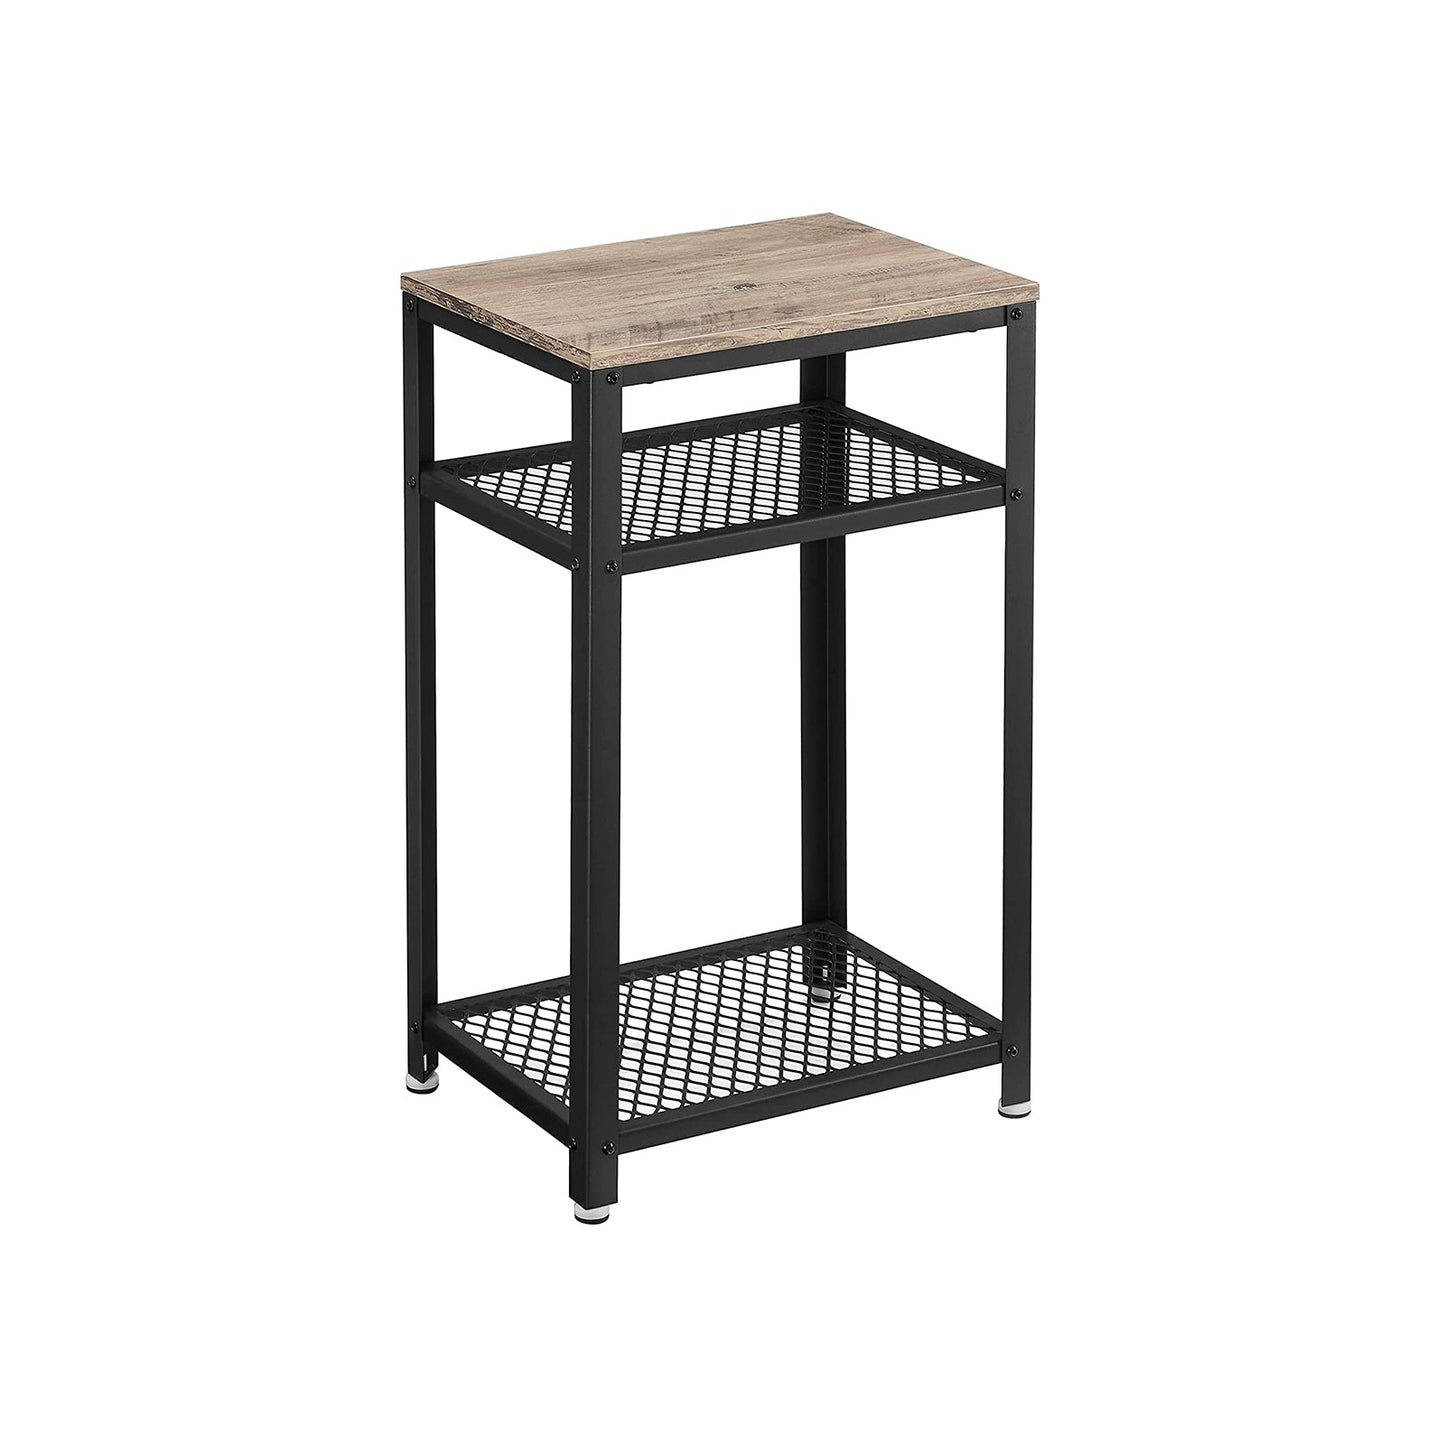 End Telephone Table with 2 Mesh Shelves